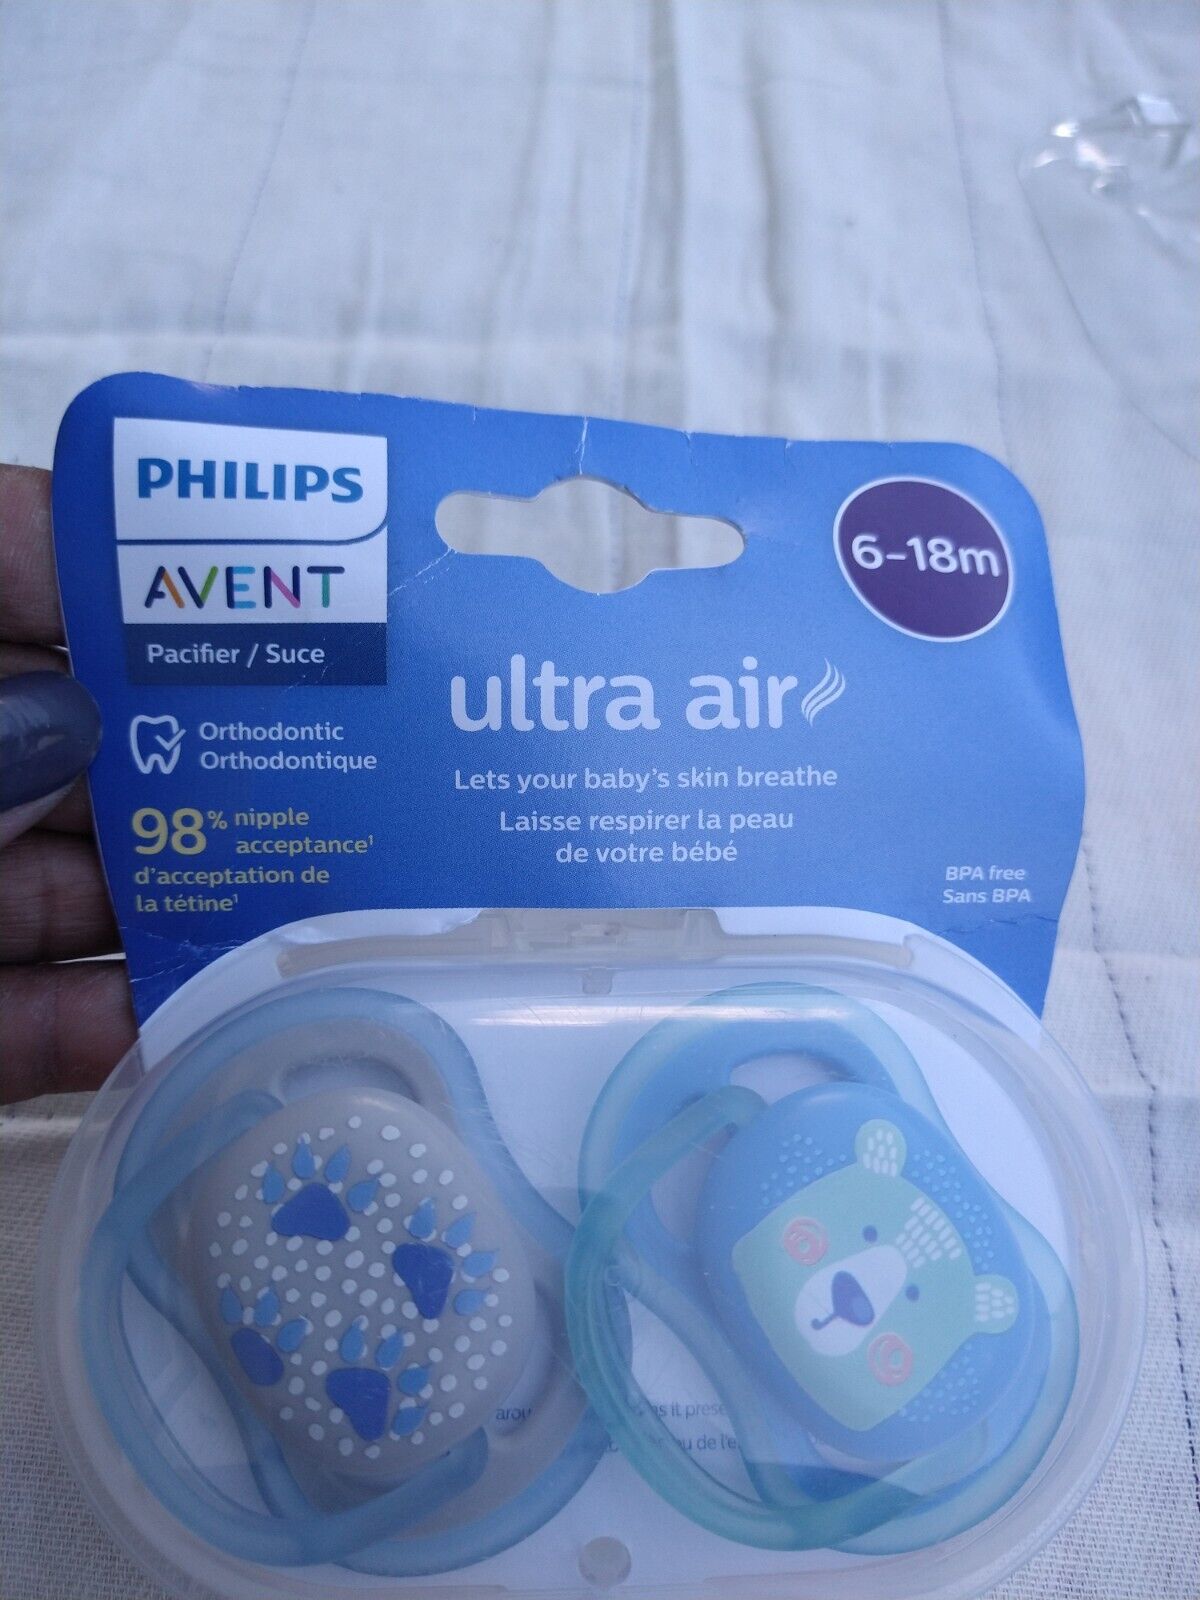 Primary image for Philips Avent Ultra Air 2-Pack Orthodontic Pacifiers W/ Carrying Case 6-18m Bear